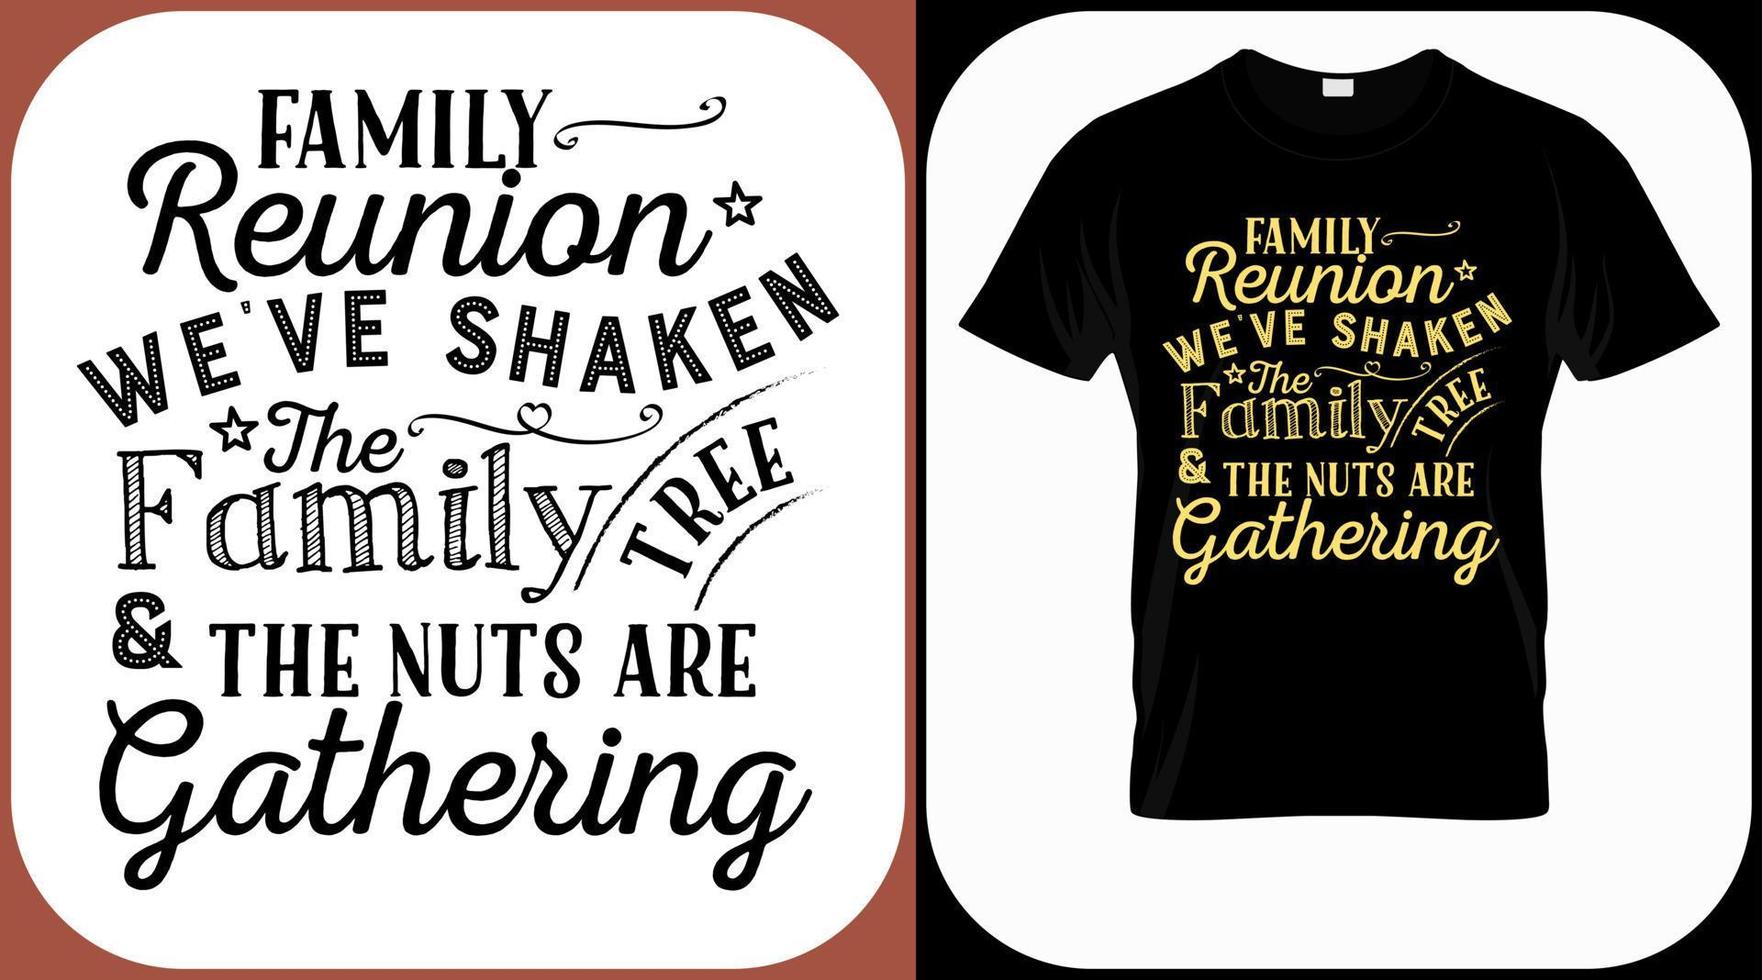 Family reunion we have shaken the family tree and the nuts are gathering. Family reunion text design. Vintage lettering for social get togethers with the family and relatives. Reunion celebration sign vector